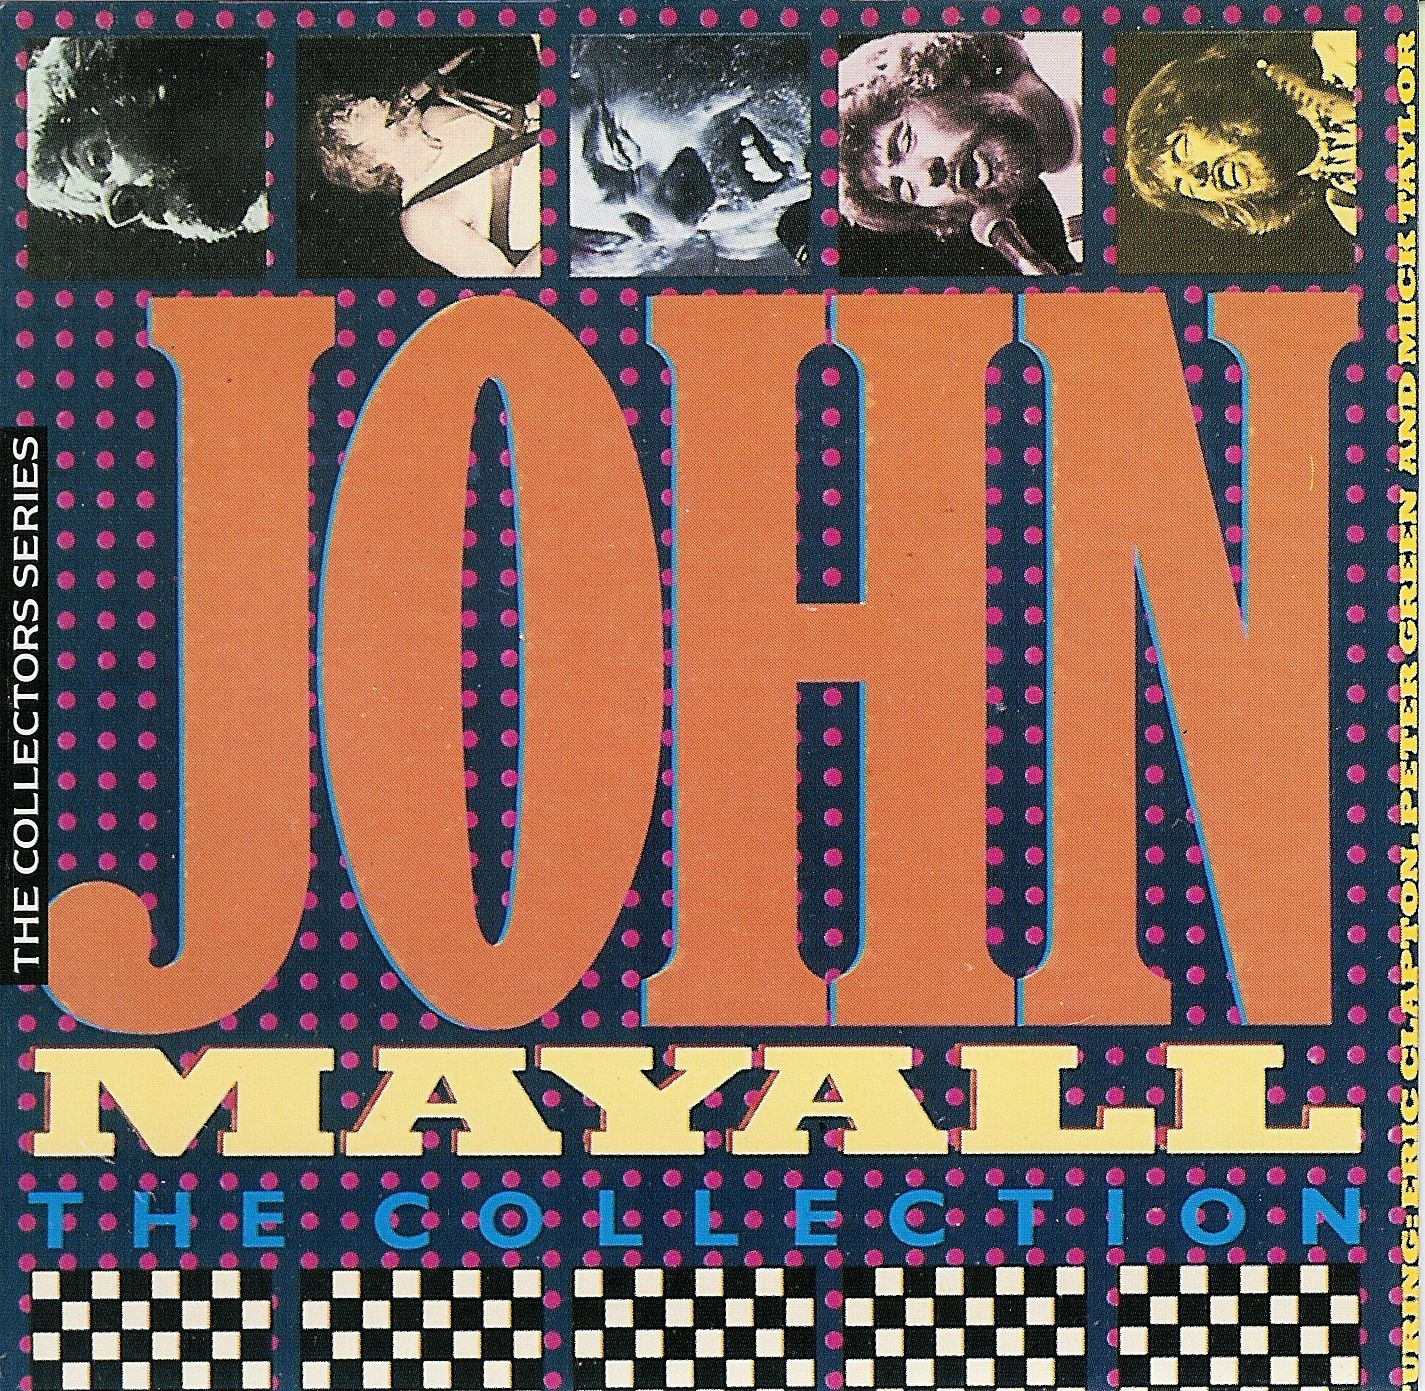 John Mayall: The Collection track art